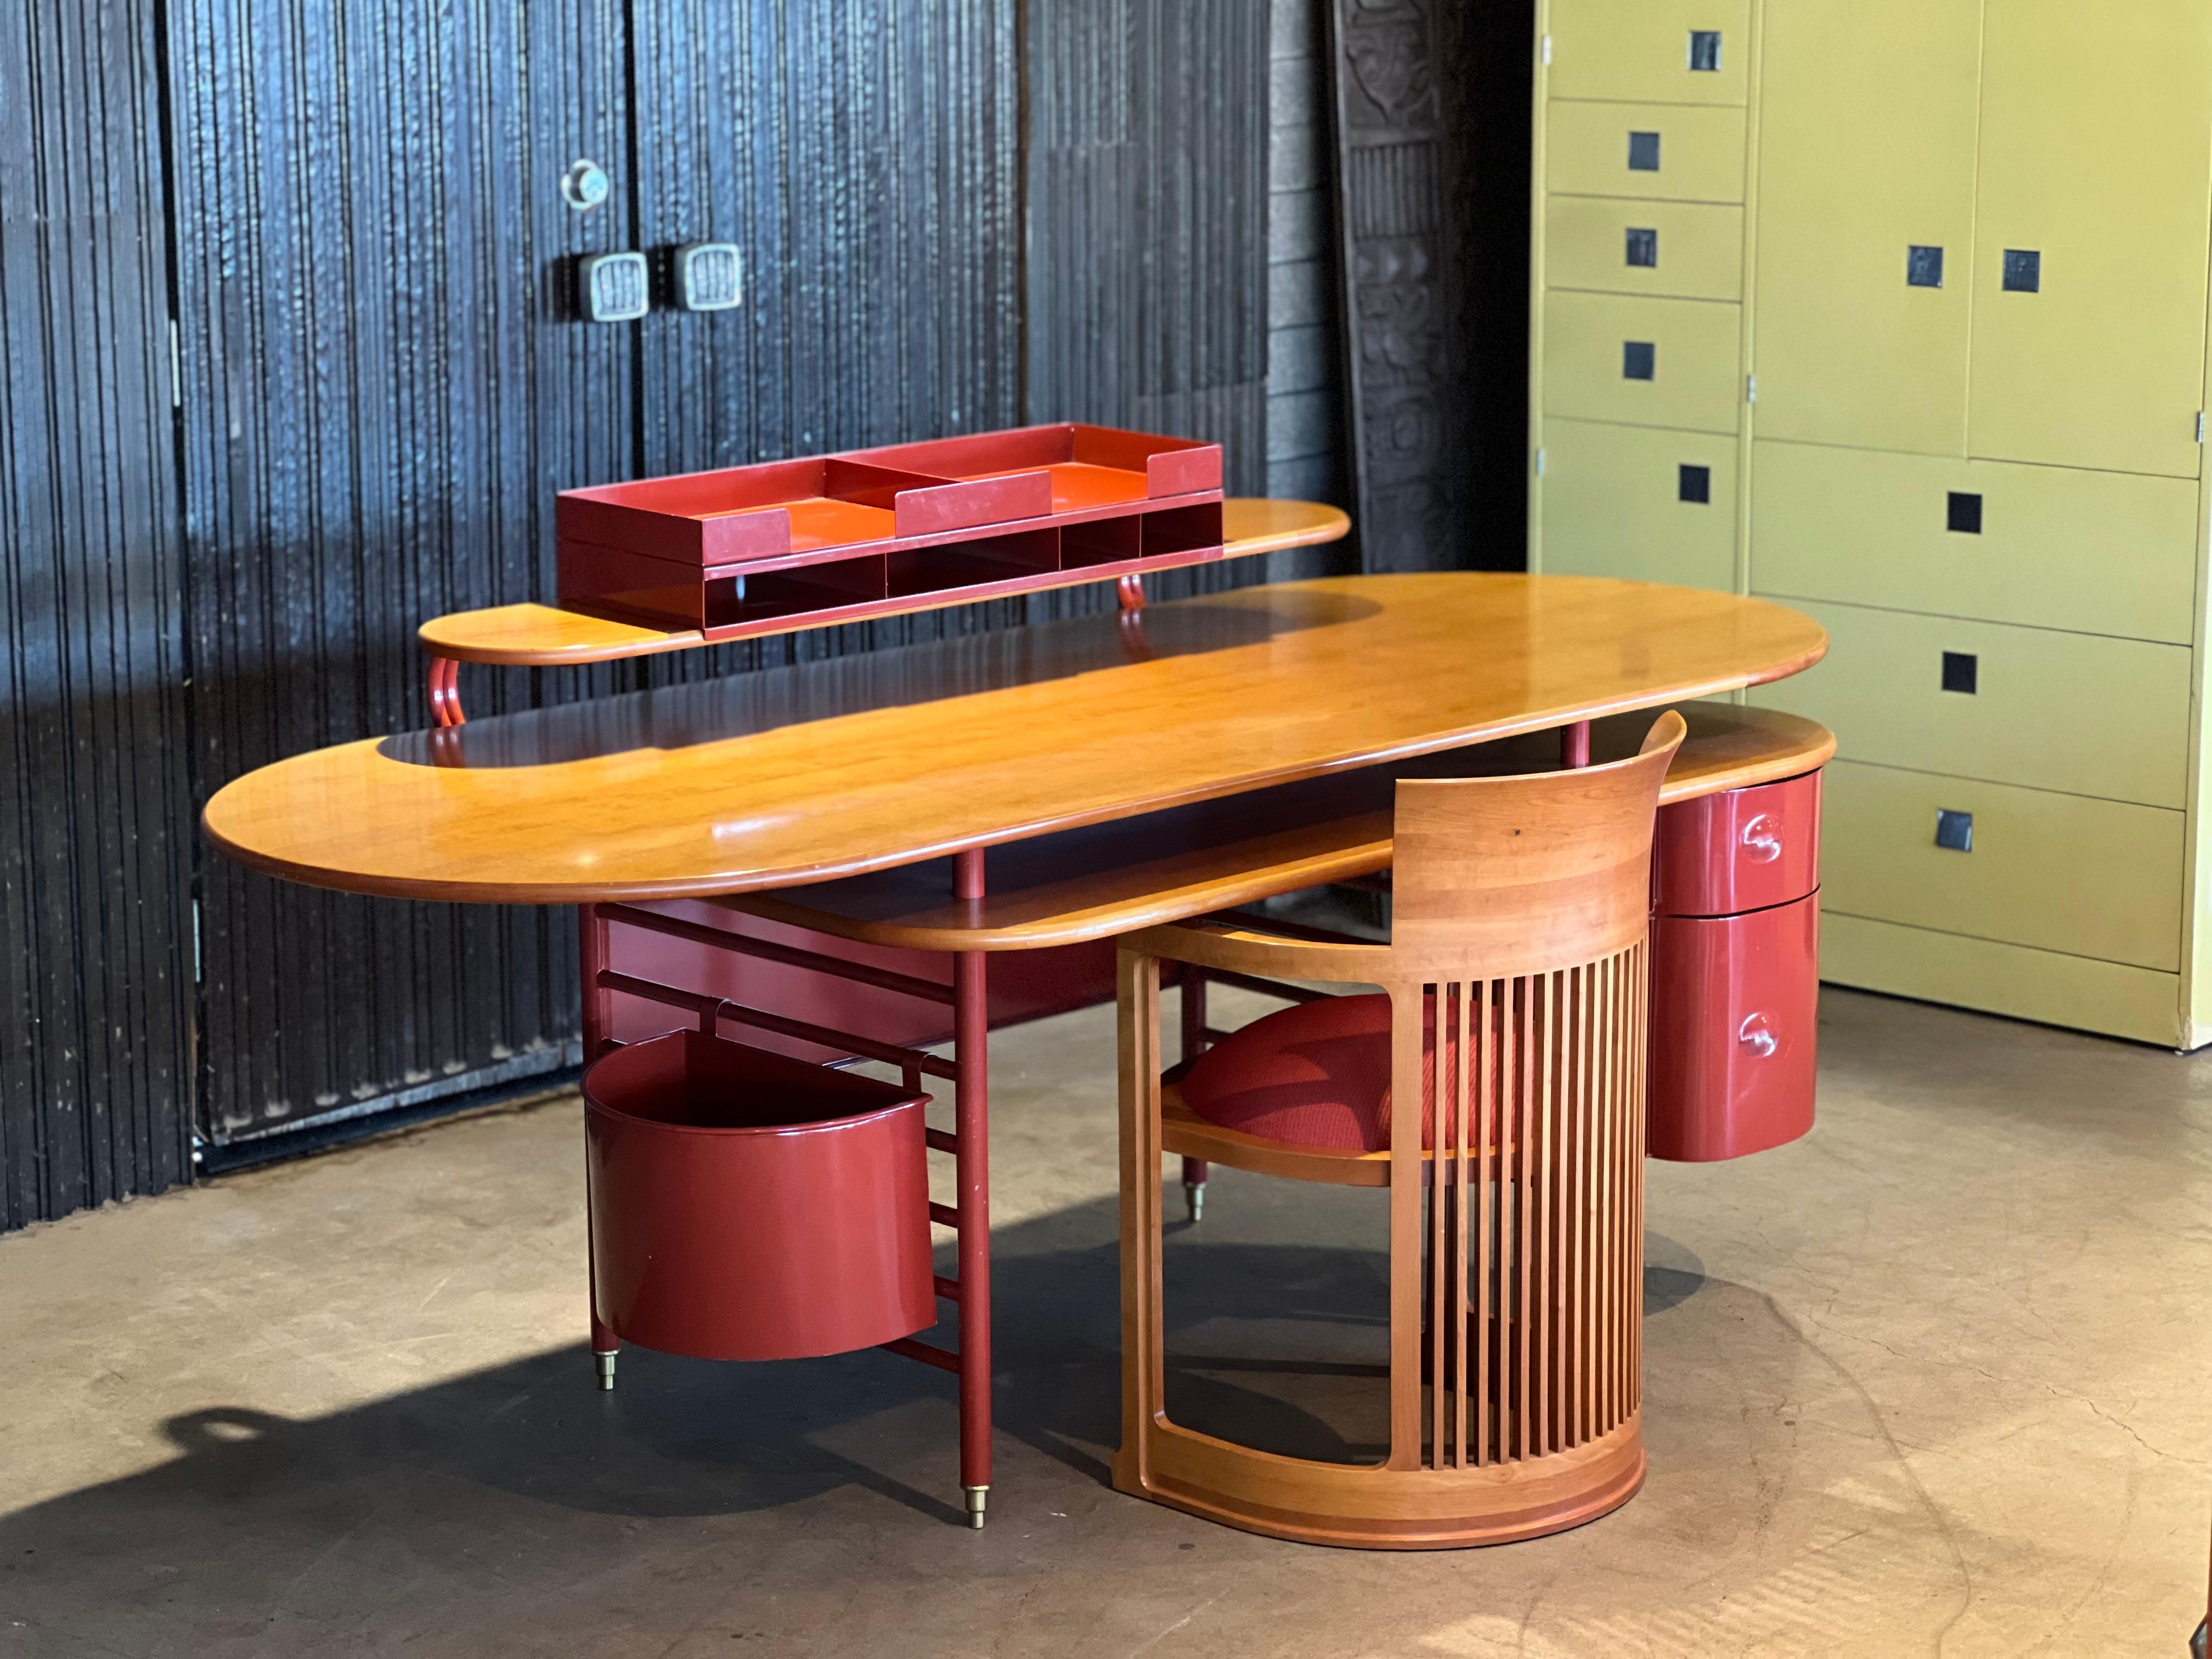 Frank Lloyd Wright for Cassina 617 desk. Originally designed in 1936 for the S.C. Johnson Wax Company in Wisconsin. This all original example dates from the late 1980s and is signed and numbered. Done in enameled steel, brass and cherry. 

Please